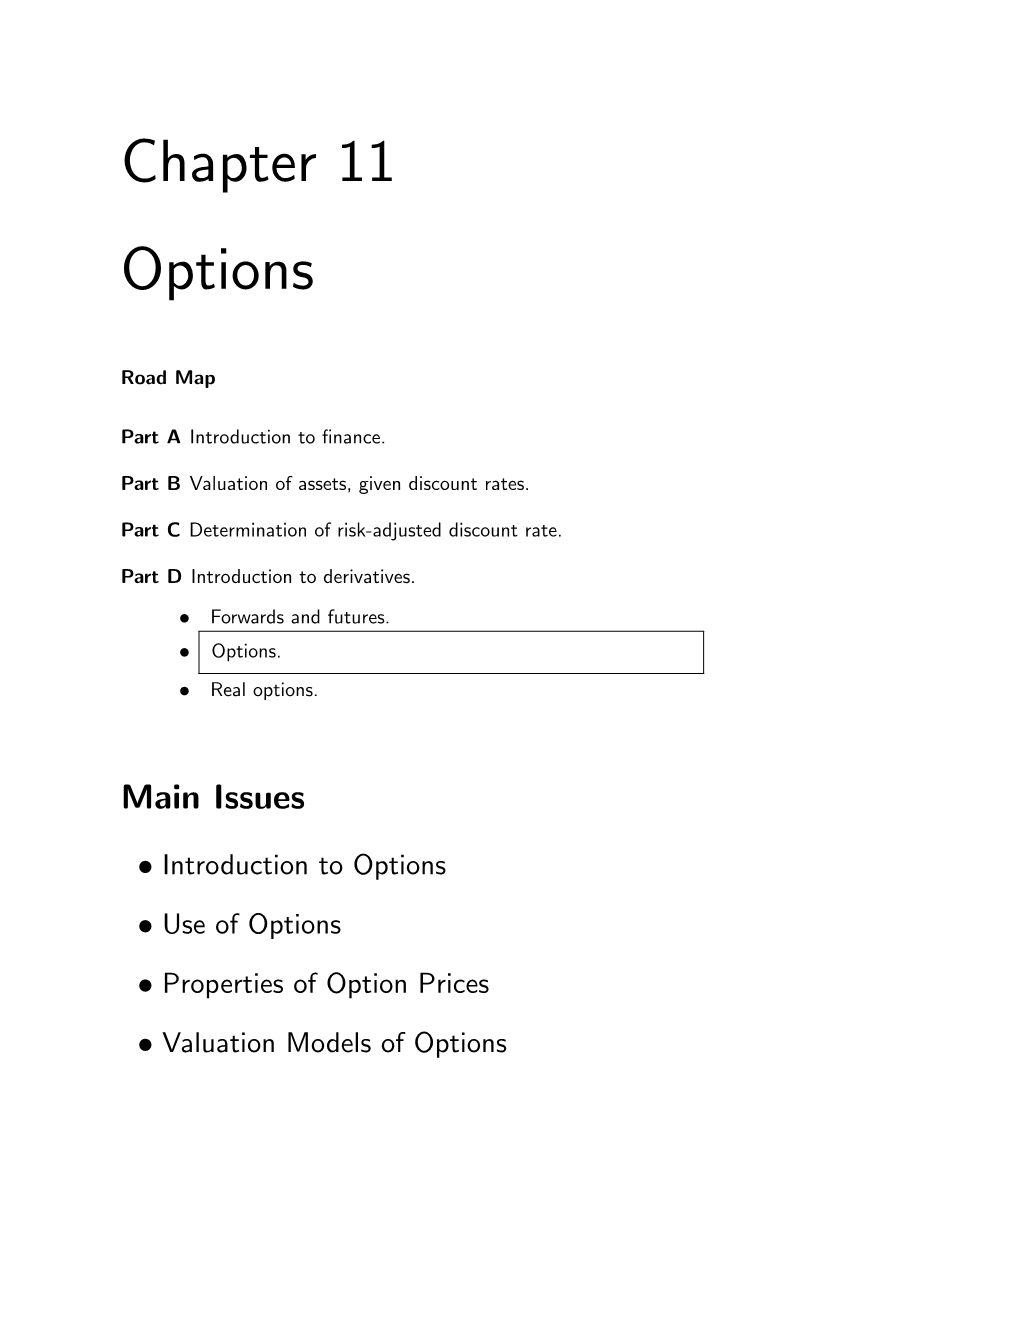 Chapter 11 Options